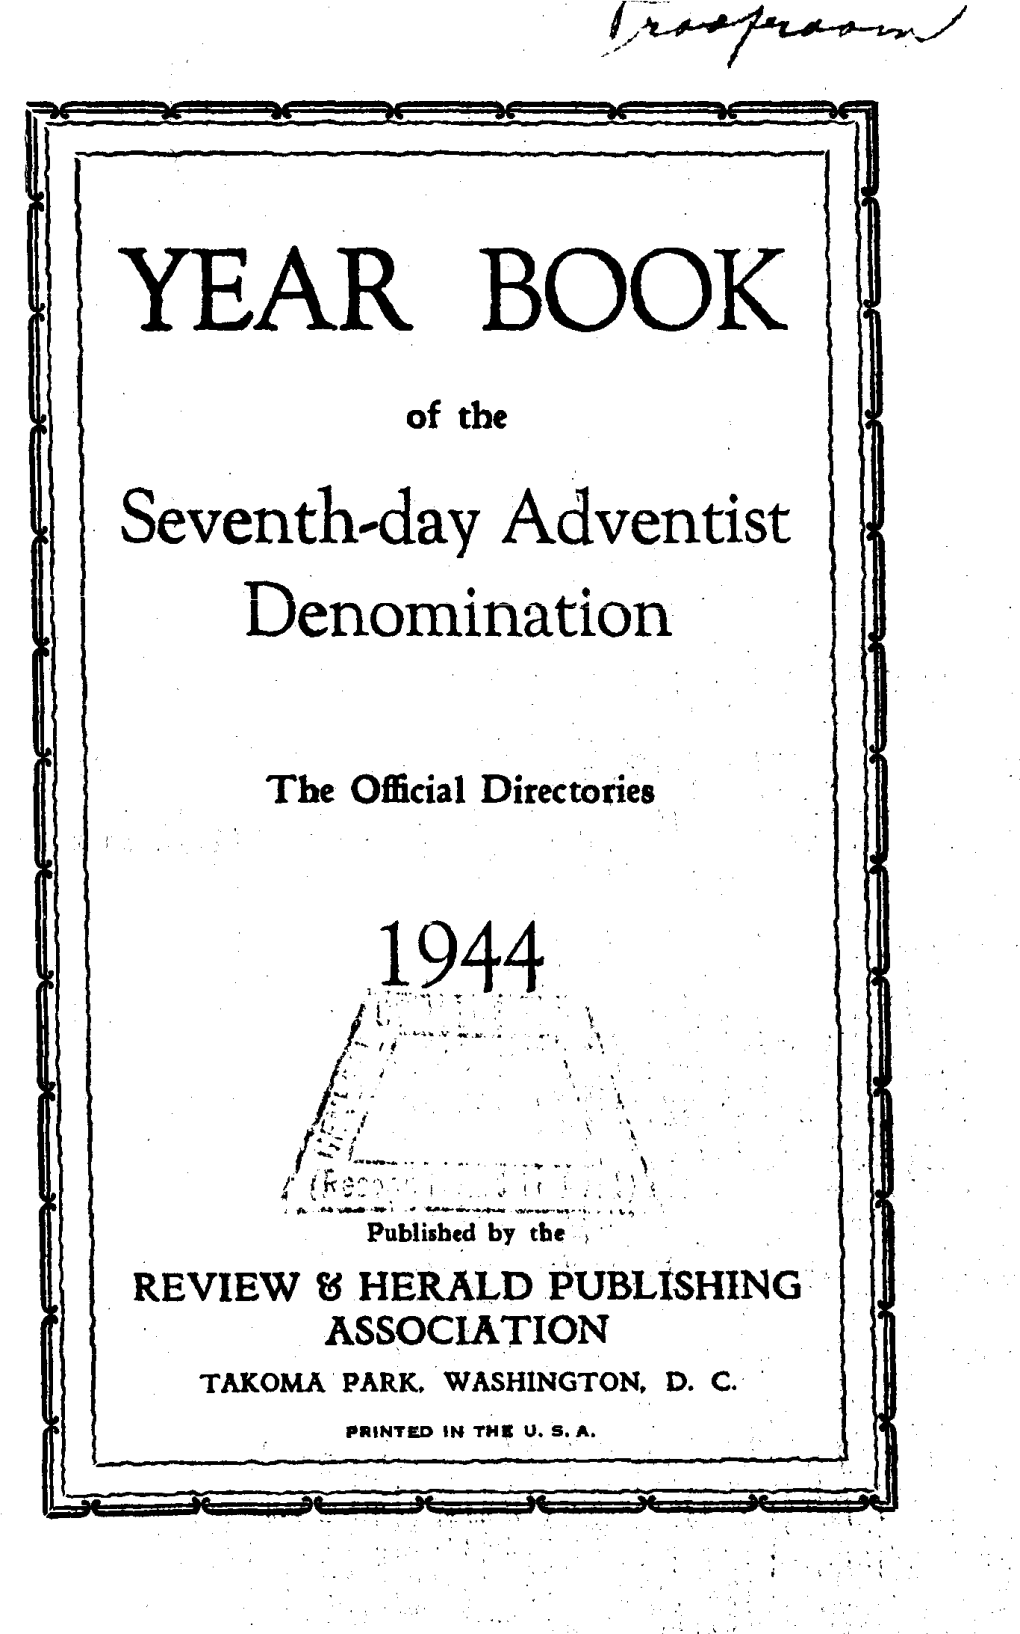 YEAR BOOK of the Seventh-Day Adventist Denomination